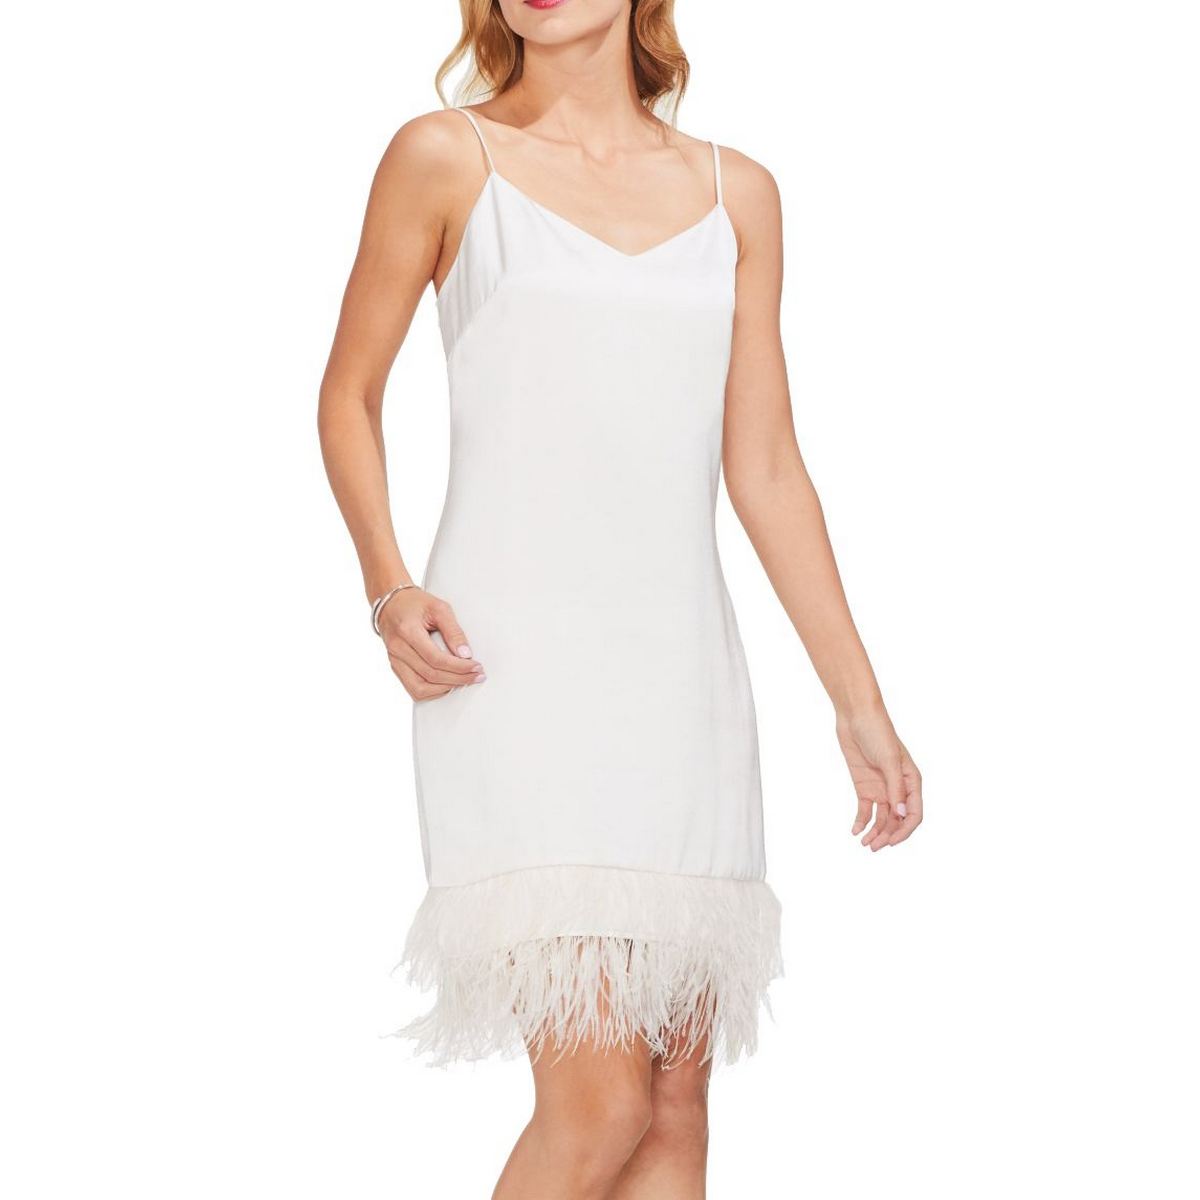 vince camuto feather dress